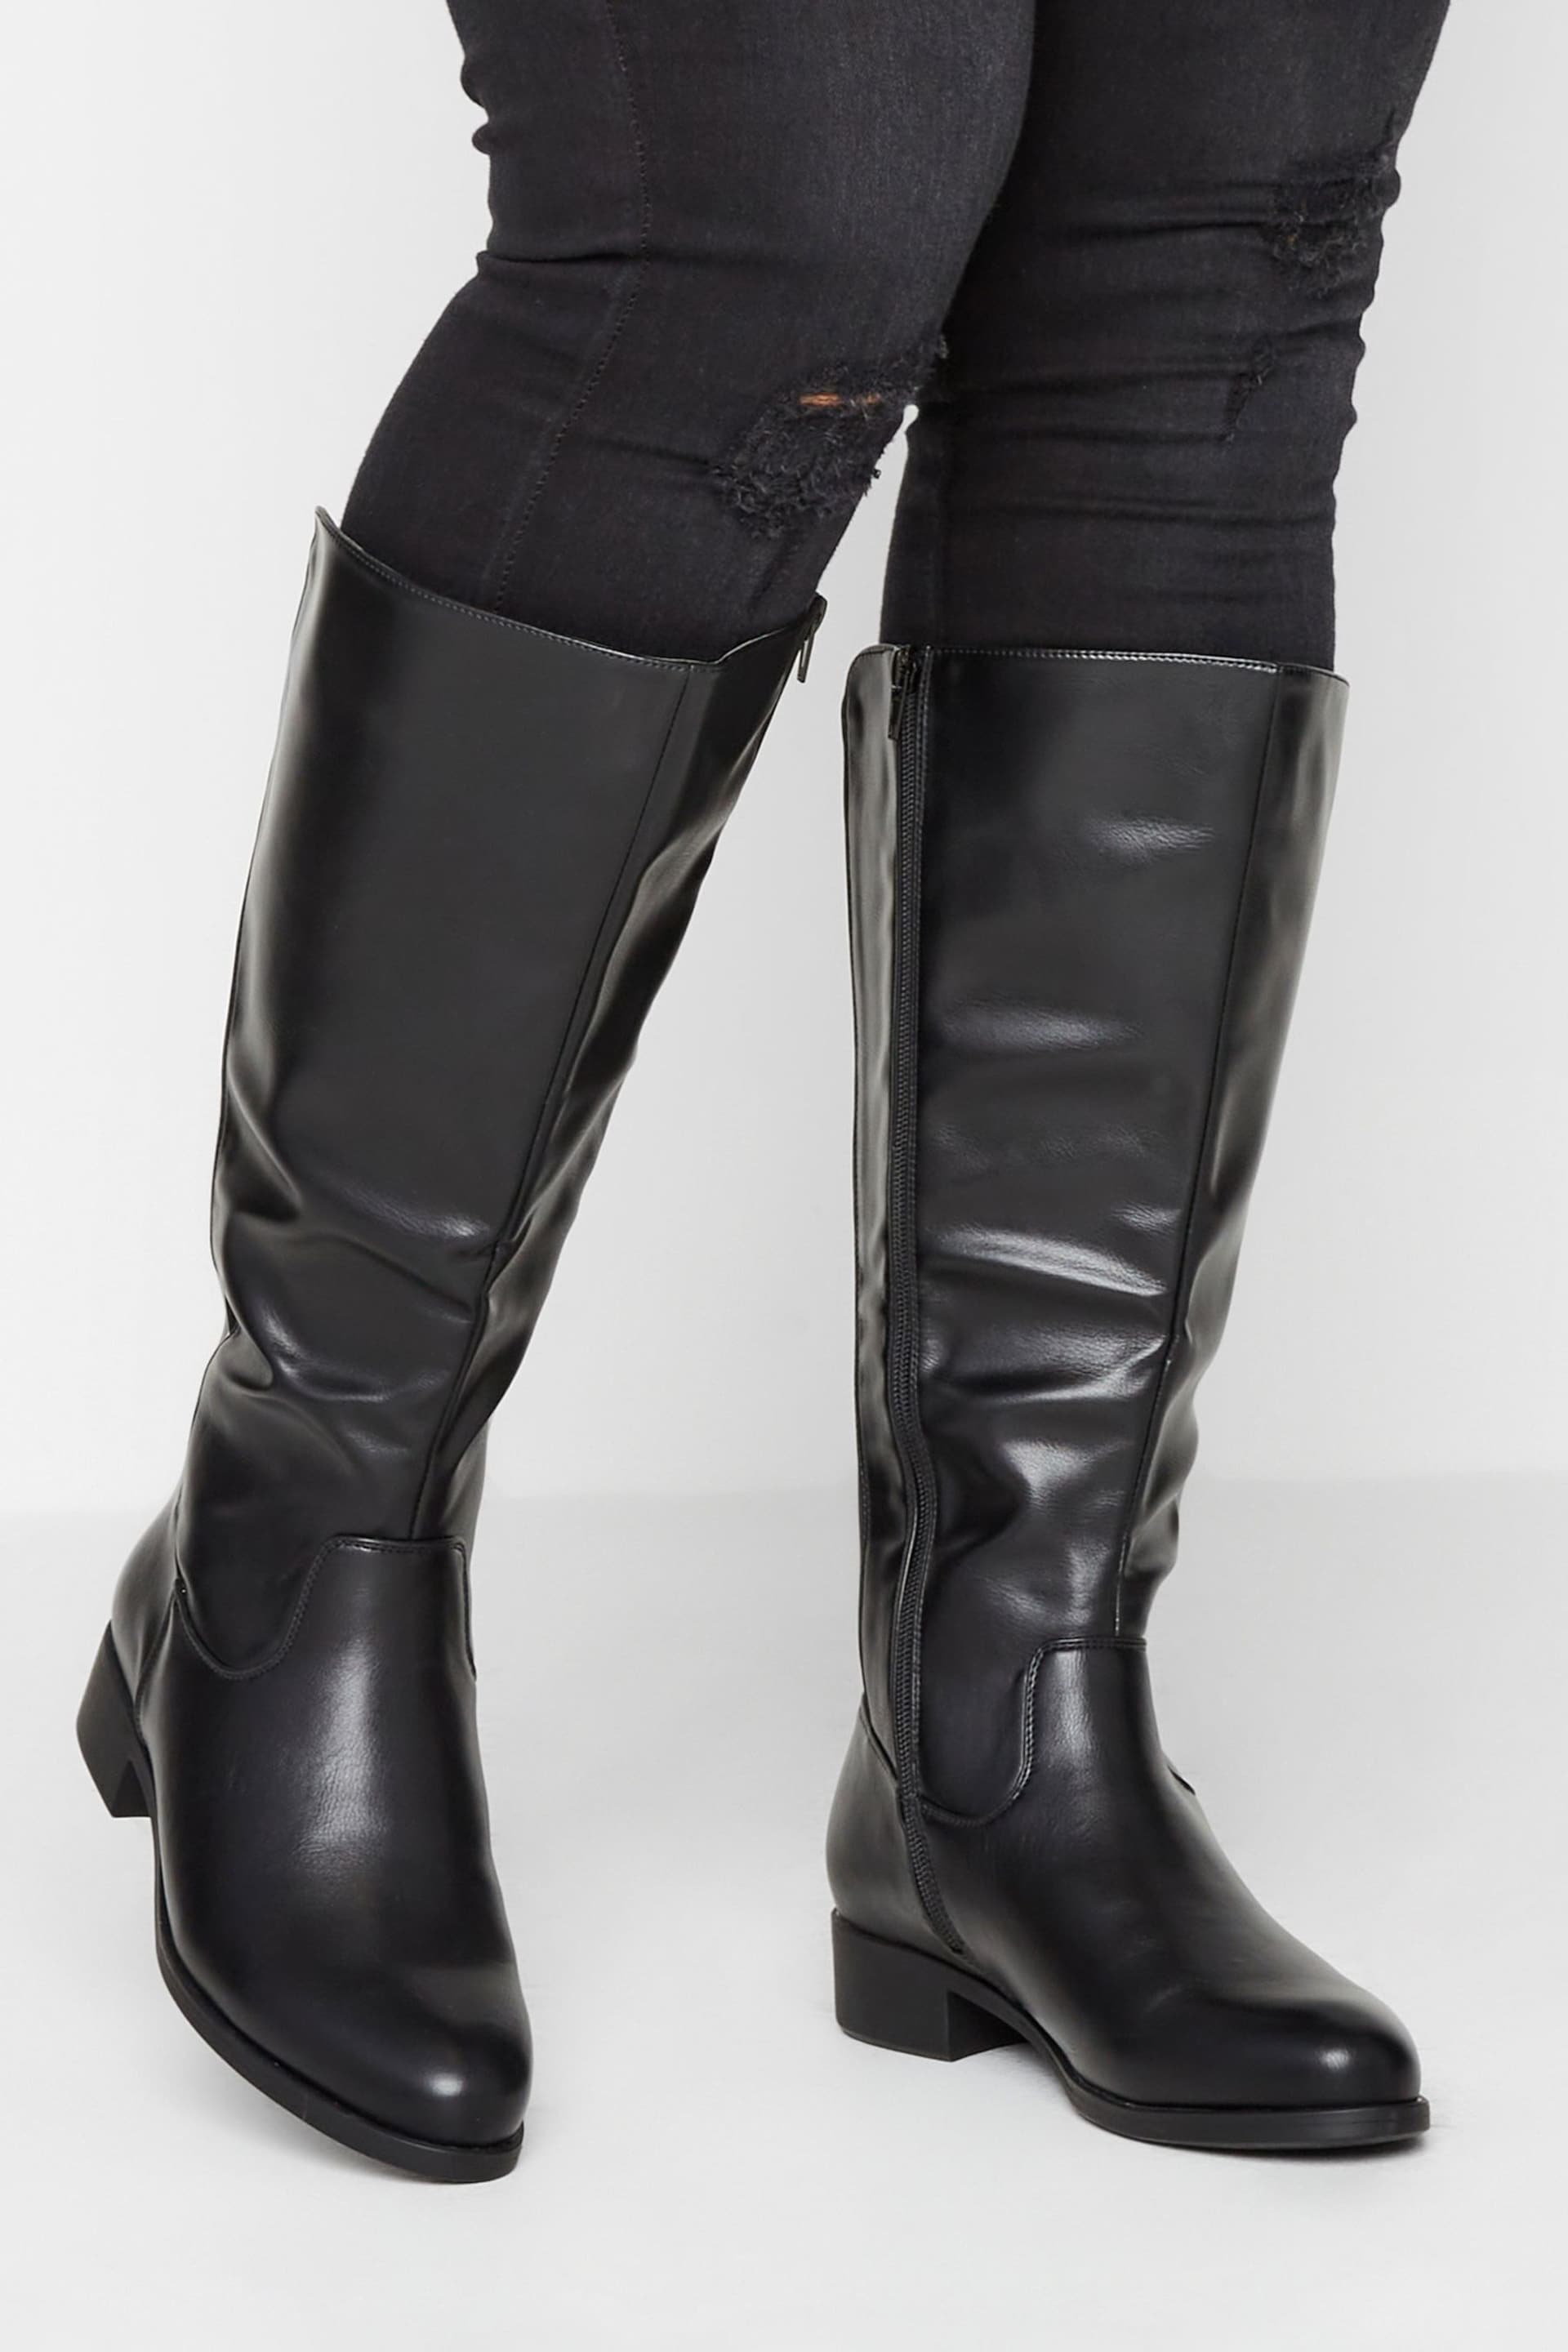 Yours Curve Black Wide Fit Wide Fit Stretch Knee PU Boot - Image 2 of 4